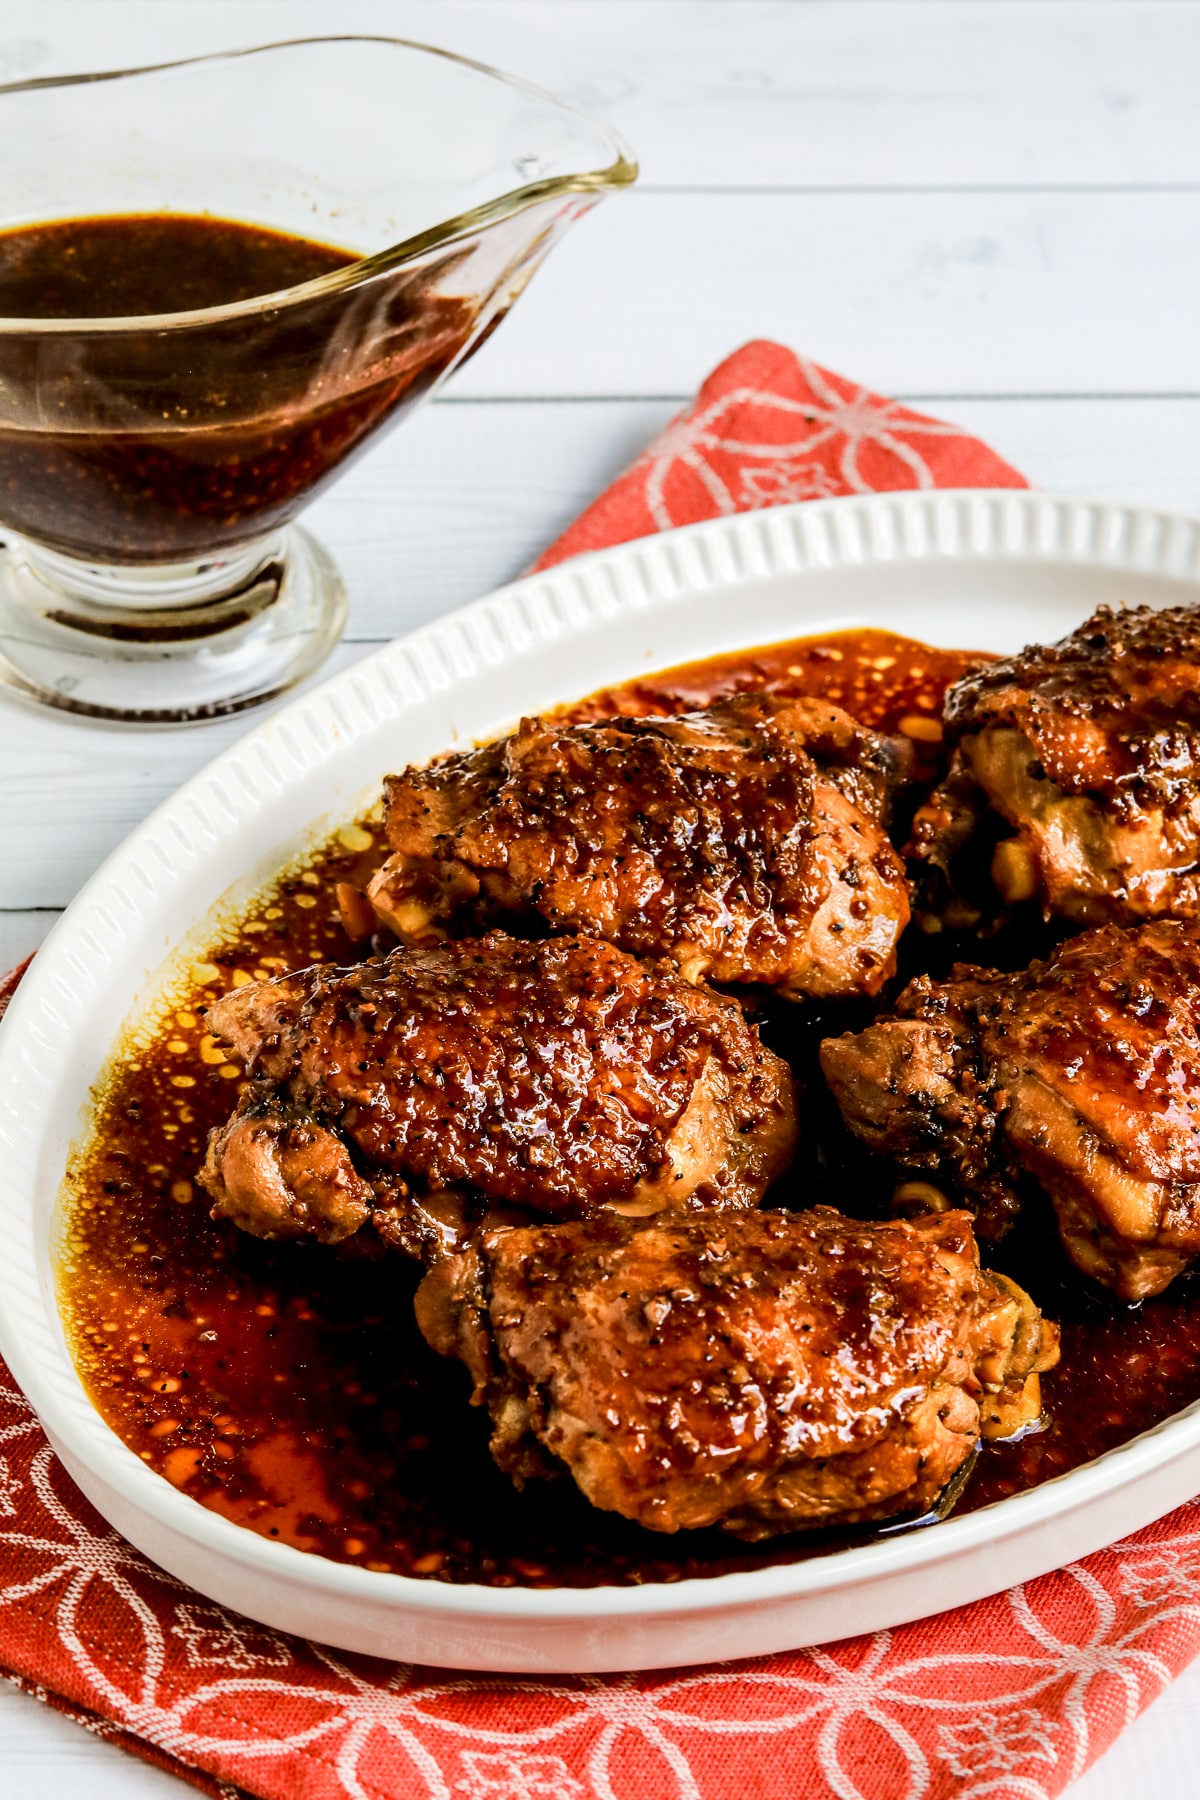 Filipino Chicken Adobo (Cooked in Soy Sauce and Vinegar)